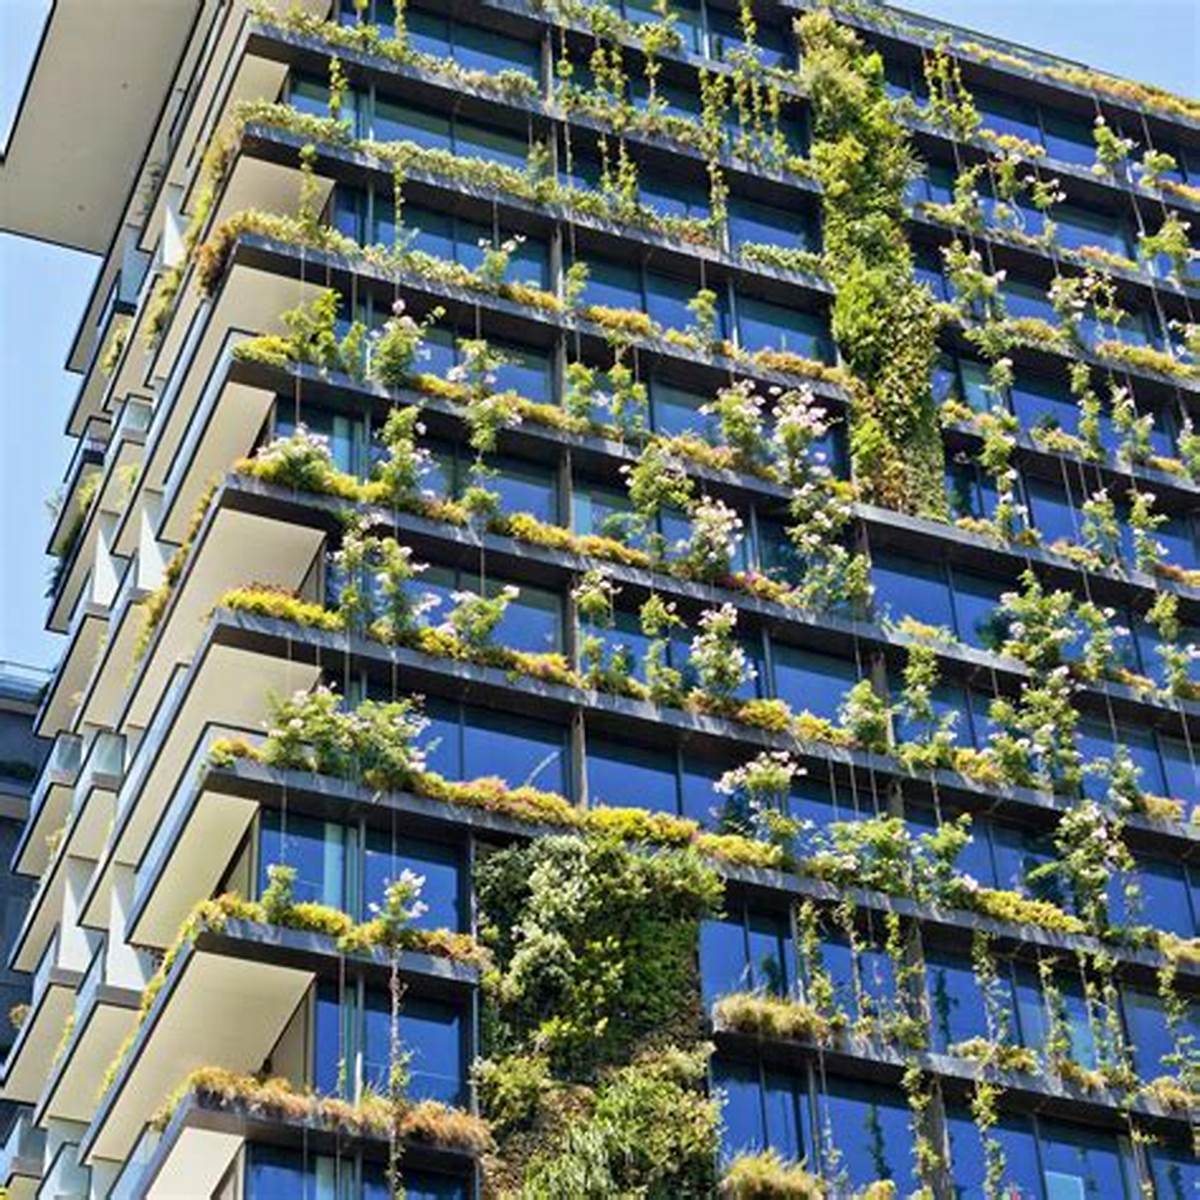 Vertical Gardens: Bridging the Gap Between Nature and Architecture